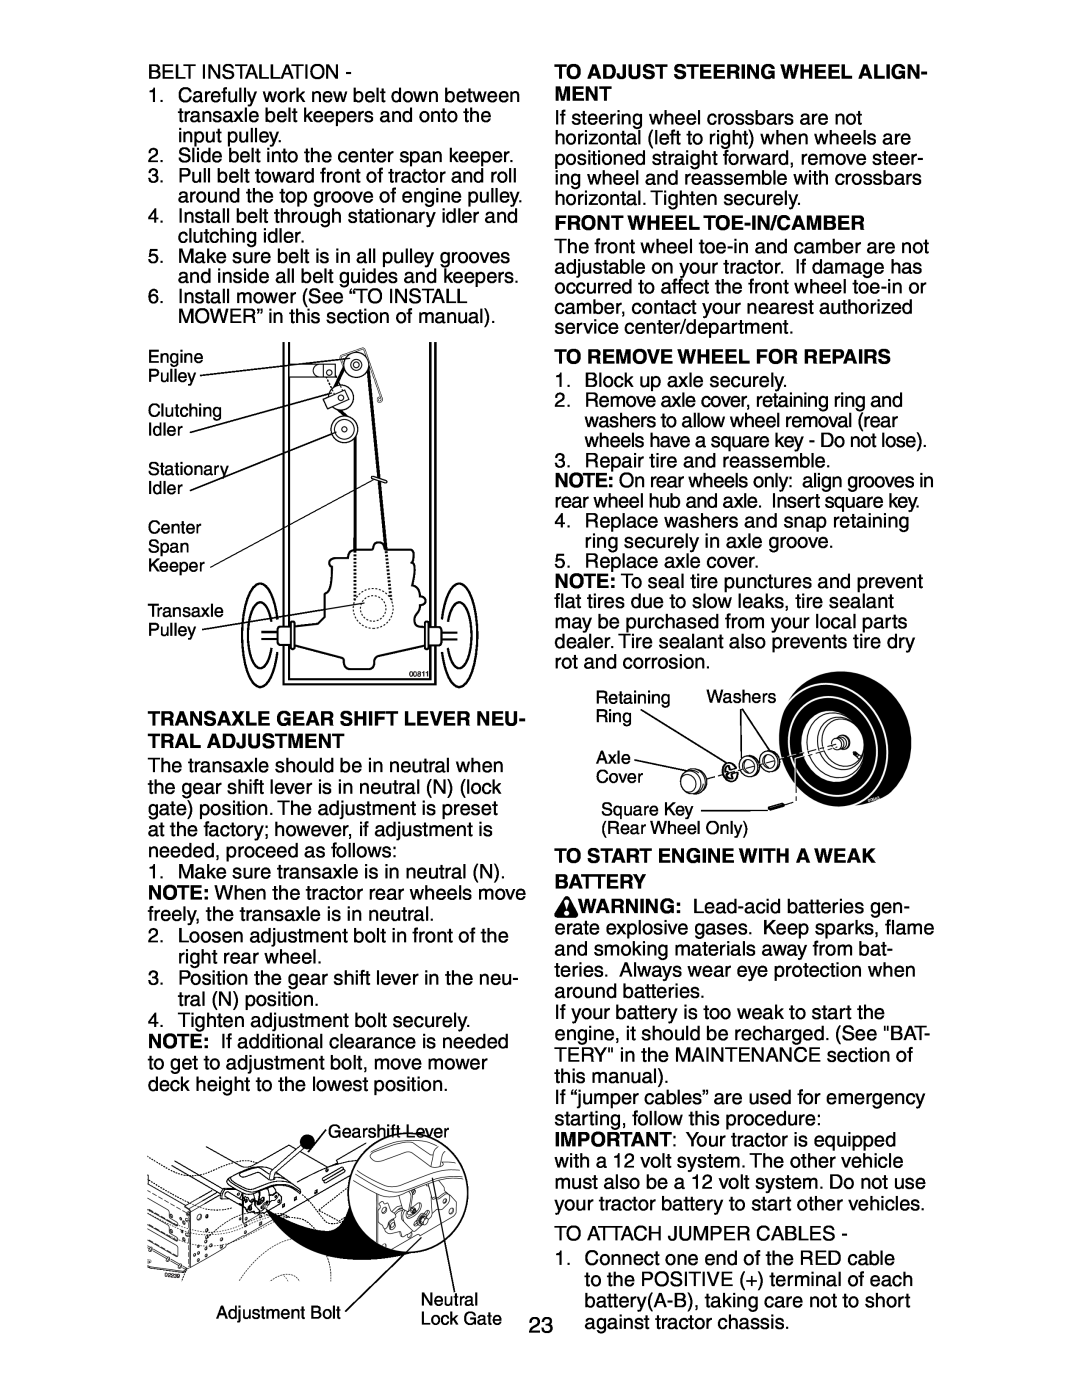 Poulan CO1842STA manual To Adjust Steering Wheel Align- Ment, Front Wheel Toe-In/Camber, To Remove Wheel For Repairs 